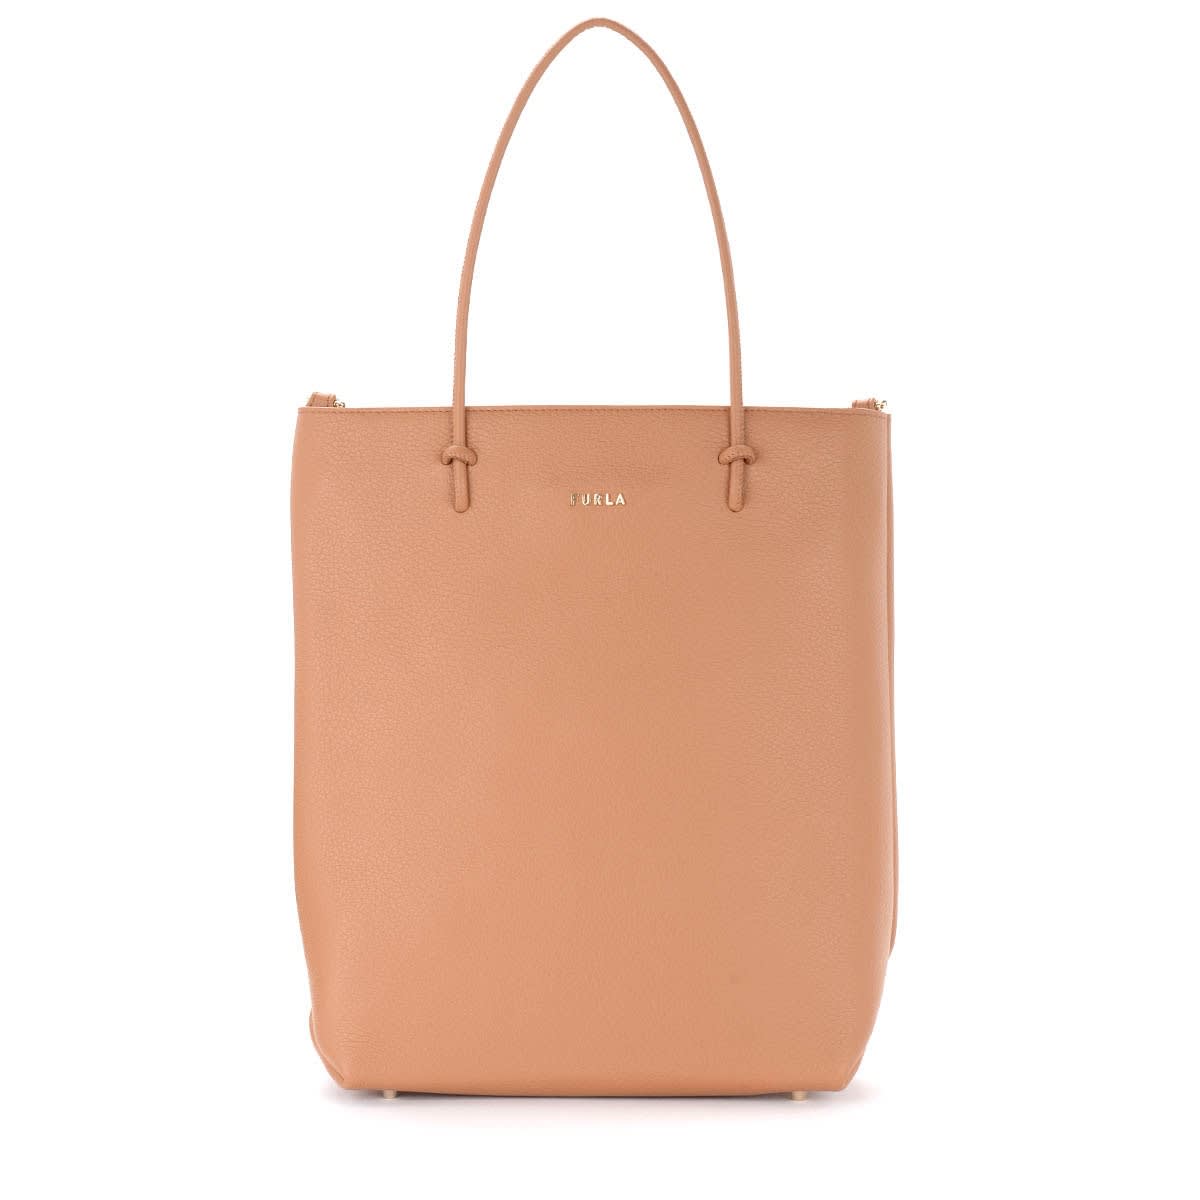 Furla Essential M Shopping Bag In Honey-colored Leather